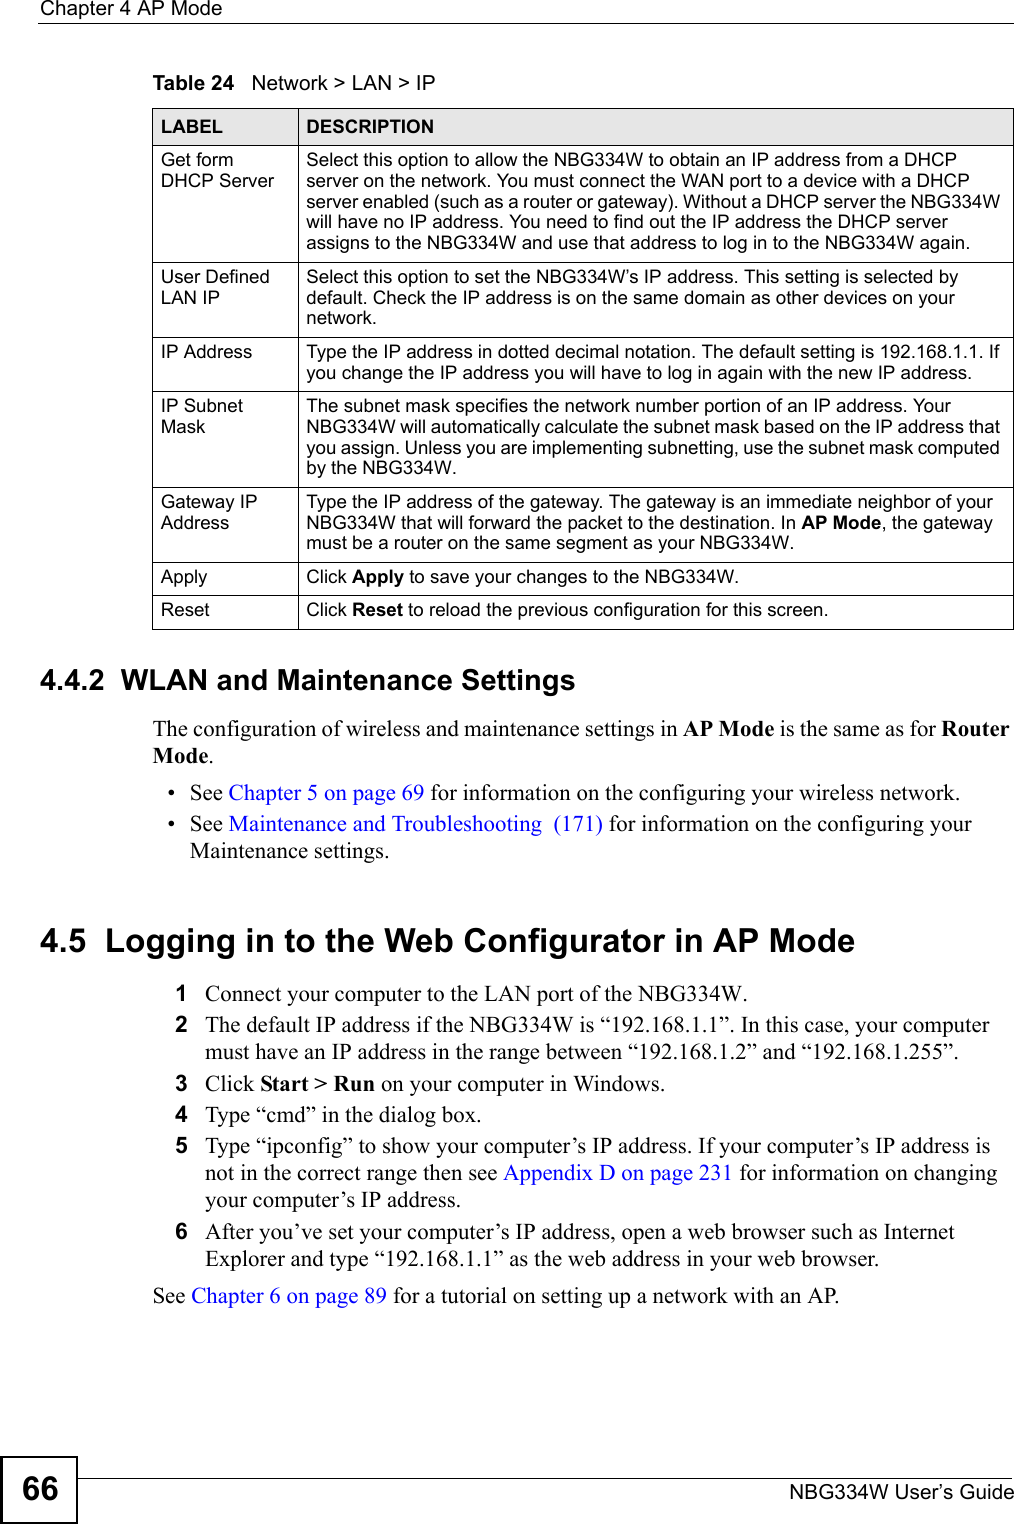 Chapter 4 AP ModeNBG334W User’s Guide66Table 24   Network &gt; LAN &gt; IP     4.4.2  WLAN and Maintenance SettingsThe configuration of wireless and maintenance settings in AP Mode is the same as for Router Mode.• See Chapter 5 on page 69 for information on the configuring your wireless network.• See Maintenance and Troubleshooting  (171) for information on the configuring your Maintenance settings. 4.5  Logging in to the Web Configurator in AP Mode1Connect your computer to the LAN port of the NBG334W. 2The default IP address if the NBG334W is “192.168.1.1”. In this case, your computer must have an IP address in the range between “192.168.1.2” and “192.168.1.255”.3Click Start &gt; Run on your computer in Windows. 4Type “cmd” in the dialog box.5Type “ipconfig” to show your computer’s IP address. If your computer’s IP address is not in the correct range then see Appendix D on page 231 for information on changing your computer’s IP address.6After you’ve set your computer’s IP address, open a web browser such as Internet Explorer and type “192.168.1.1” as the web address in your web browser.See Chapter 6 on page 89 for a tutorial on setting up a network with an AP.LABEL DESCRIPTIONGet form DHCP ServerSelect this option to allow the NBG334W to obtain an IP address from a DHCP server on the network. You must connect the WAN port to a device with a DHCP server enabled (such as a router or gateway). Without a DHCP server the NBG334W will have no IP address. You need to find out the IP address the DHCP server assigns to the NBG334W and use that address to log in to the NBG334W again. User Defined LAN IP Select this option to set the NBG334W’s IP address. This setting is selected by default. Check the IP address is on the same domain as other devices on your network.IP Address Type the IP address in dotted decimal notation. The default setting is 192.168.1.1. If you change the IP address you will have to log in again with the new IP address.   IP Subnet MaskThe subnet mask specifies the network number portion of an IP address. Your NBG334W will automatically calculate the subnet mask based on the IP address that you assign. Unless you are implementing subnetting, use the subnet mask computed by the NBG334W.Gateway IP AddressType the IP address of the gateway. The gateway is an immediate neighbor of your NBG334W that will forward the packet to the destination. In AP Mode, the gateway must be a router on the same segment as your NBG334W.Apply Click Apply to save your changes to the NBG334W.Reset Click Reset to reload the previous configuration for this screen.